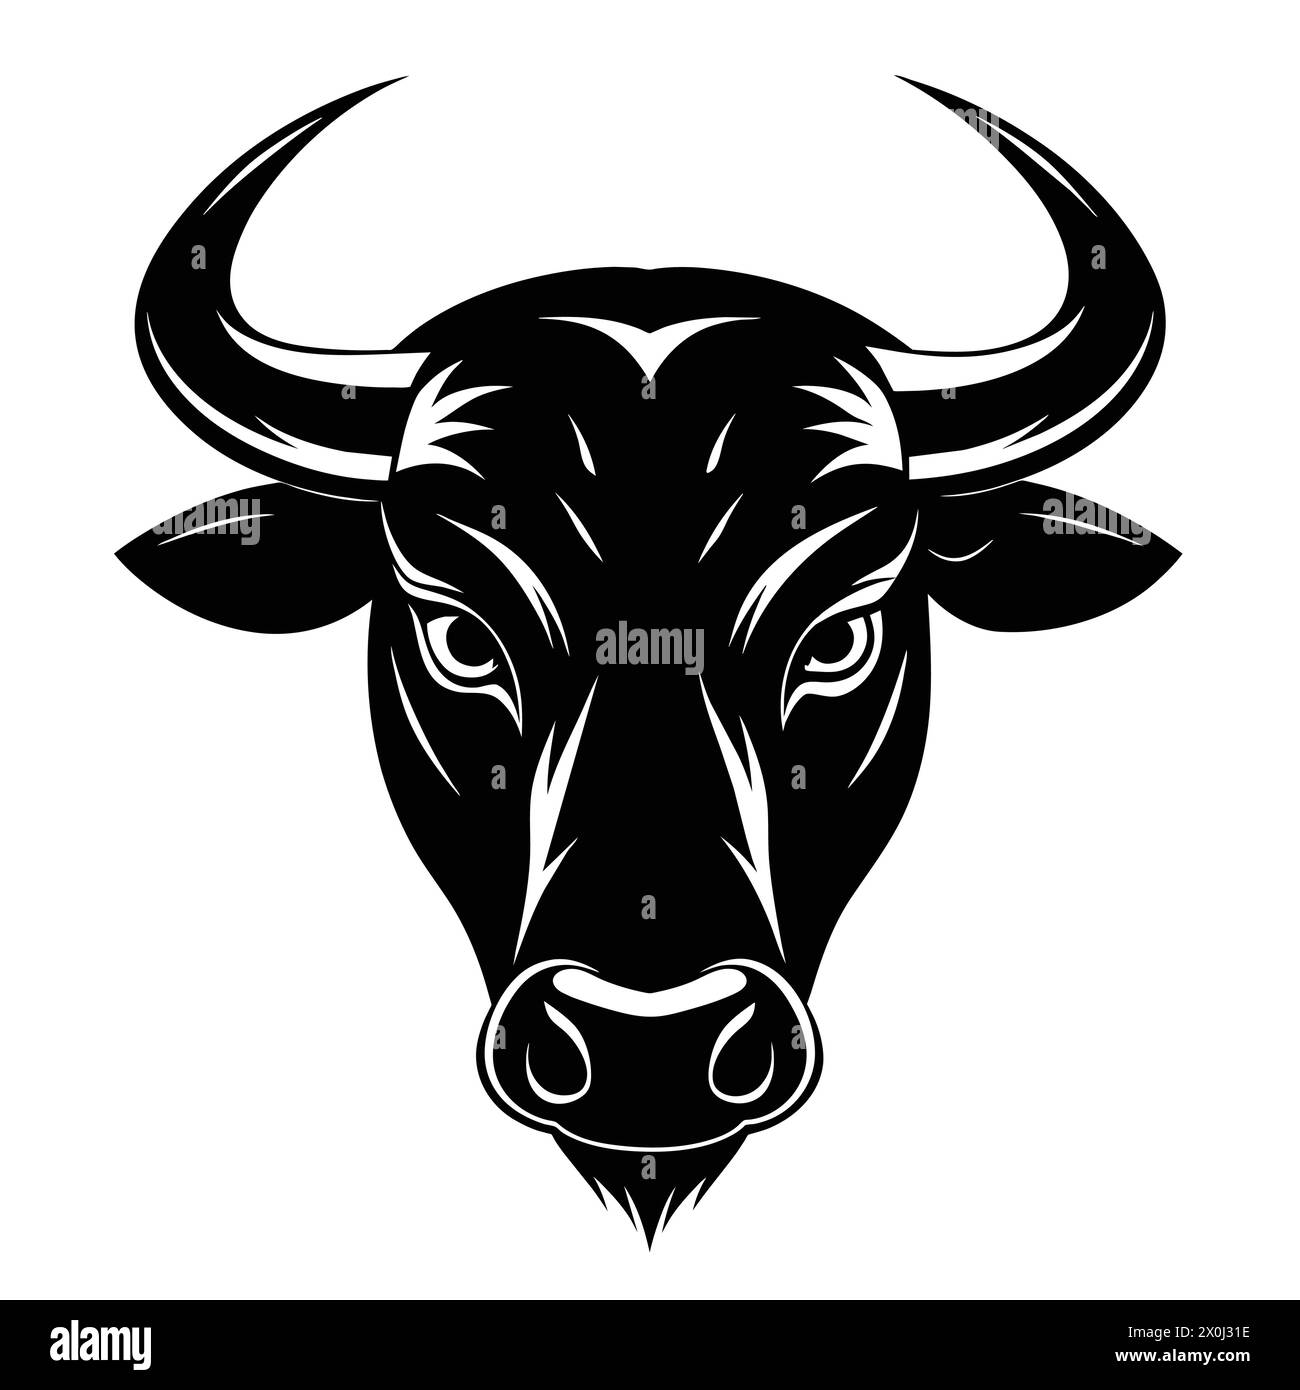 Strong Bull Head Illustrations - Ideal for Sports Team Logos, Steakhouse Branding, and Western-Themed Decor Stock Vector